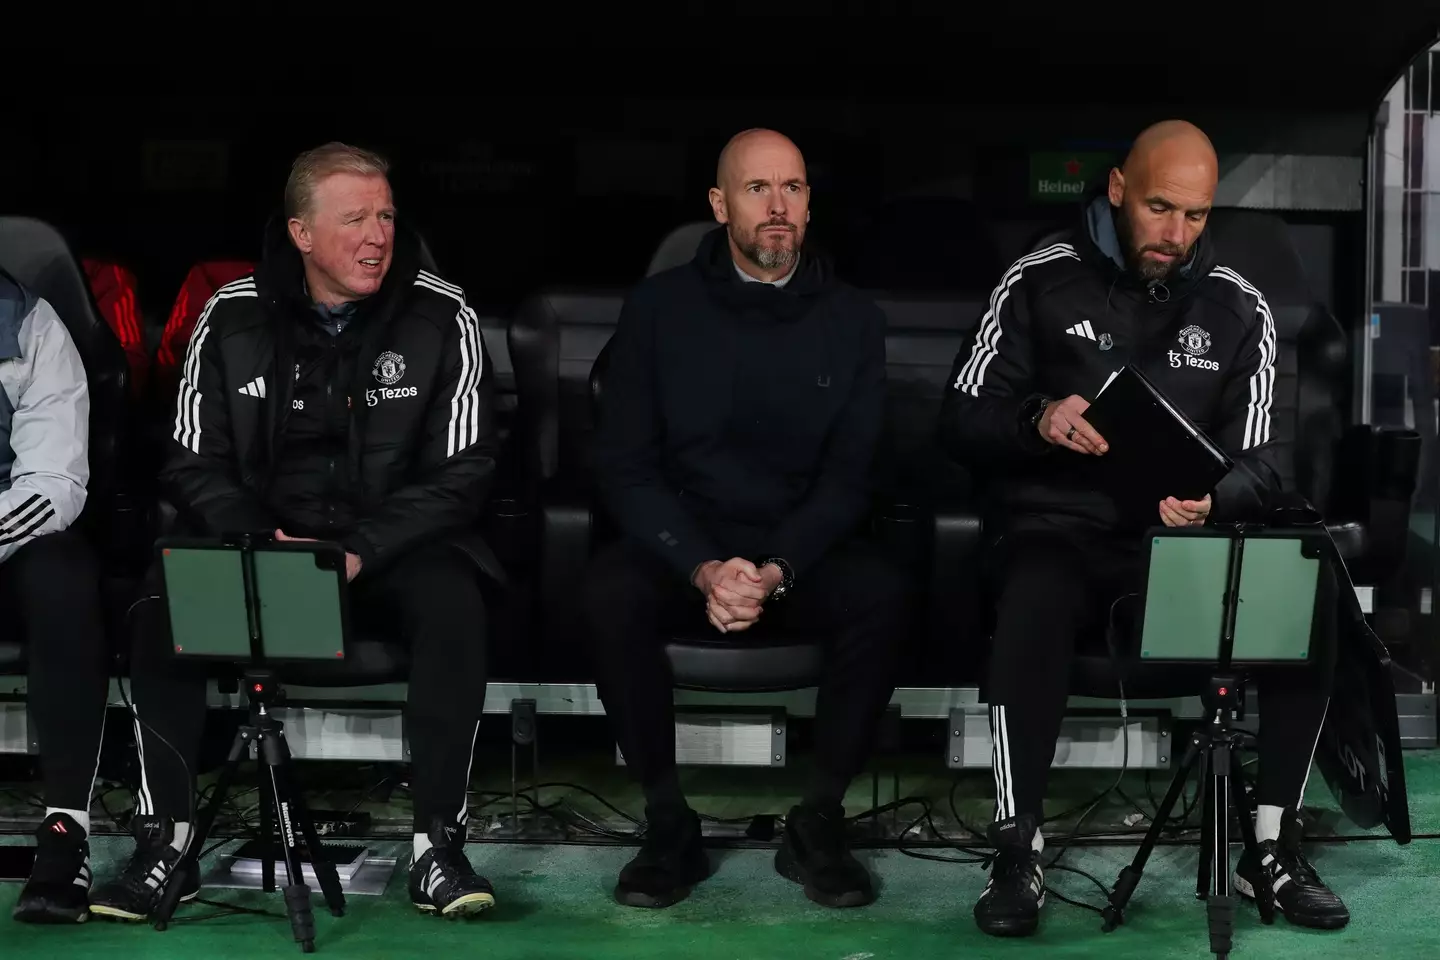 Van der Gaag (right) is an ever-present on the Man United bench, providing analysis in-game for ten Hag. (Image